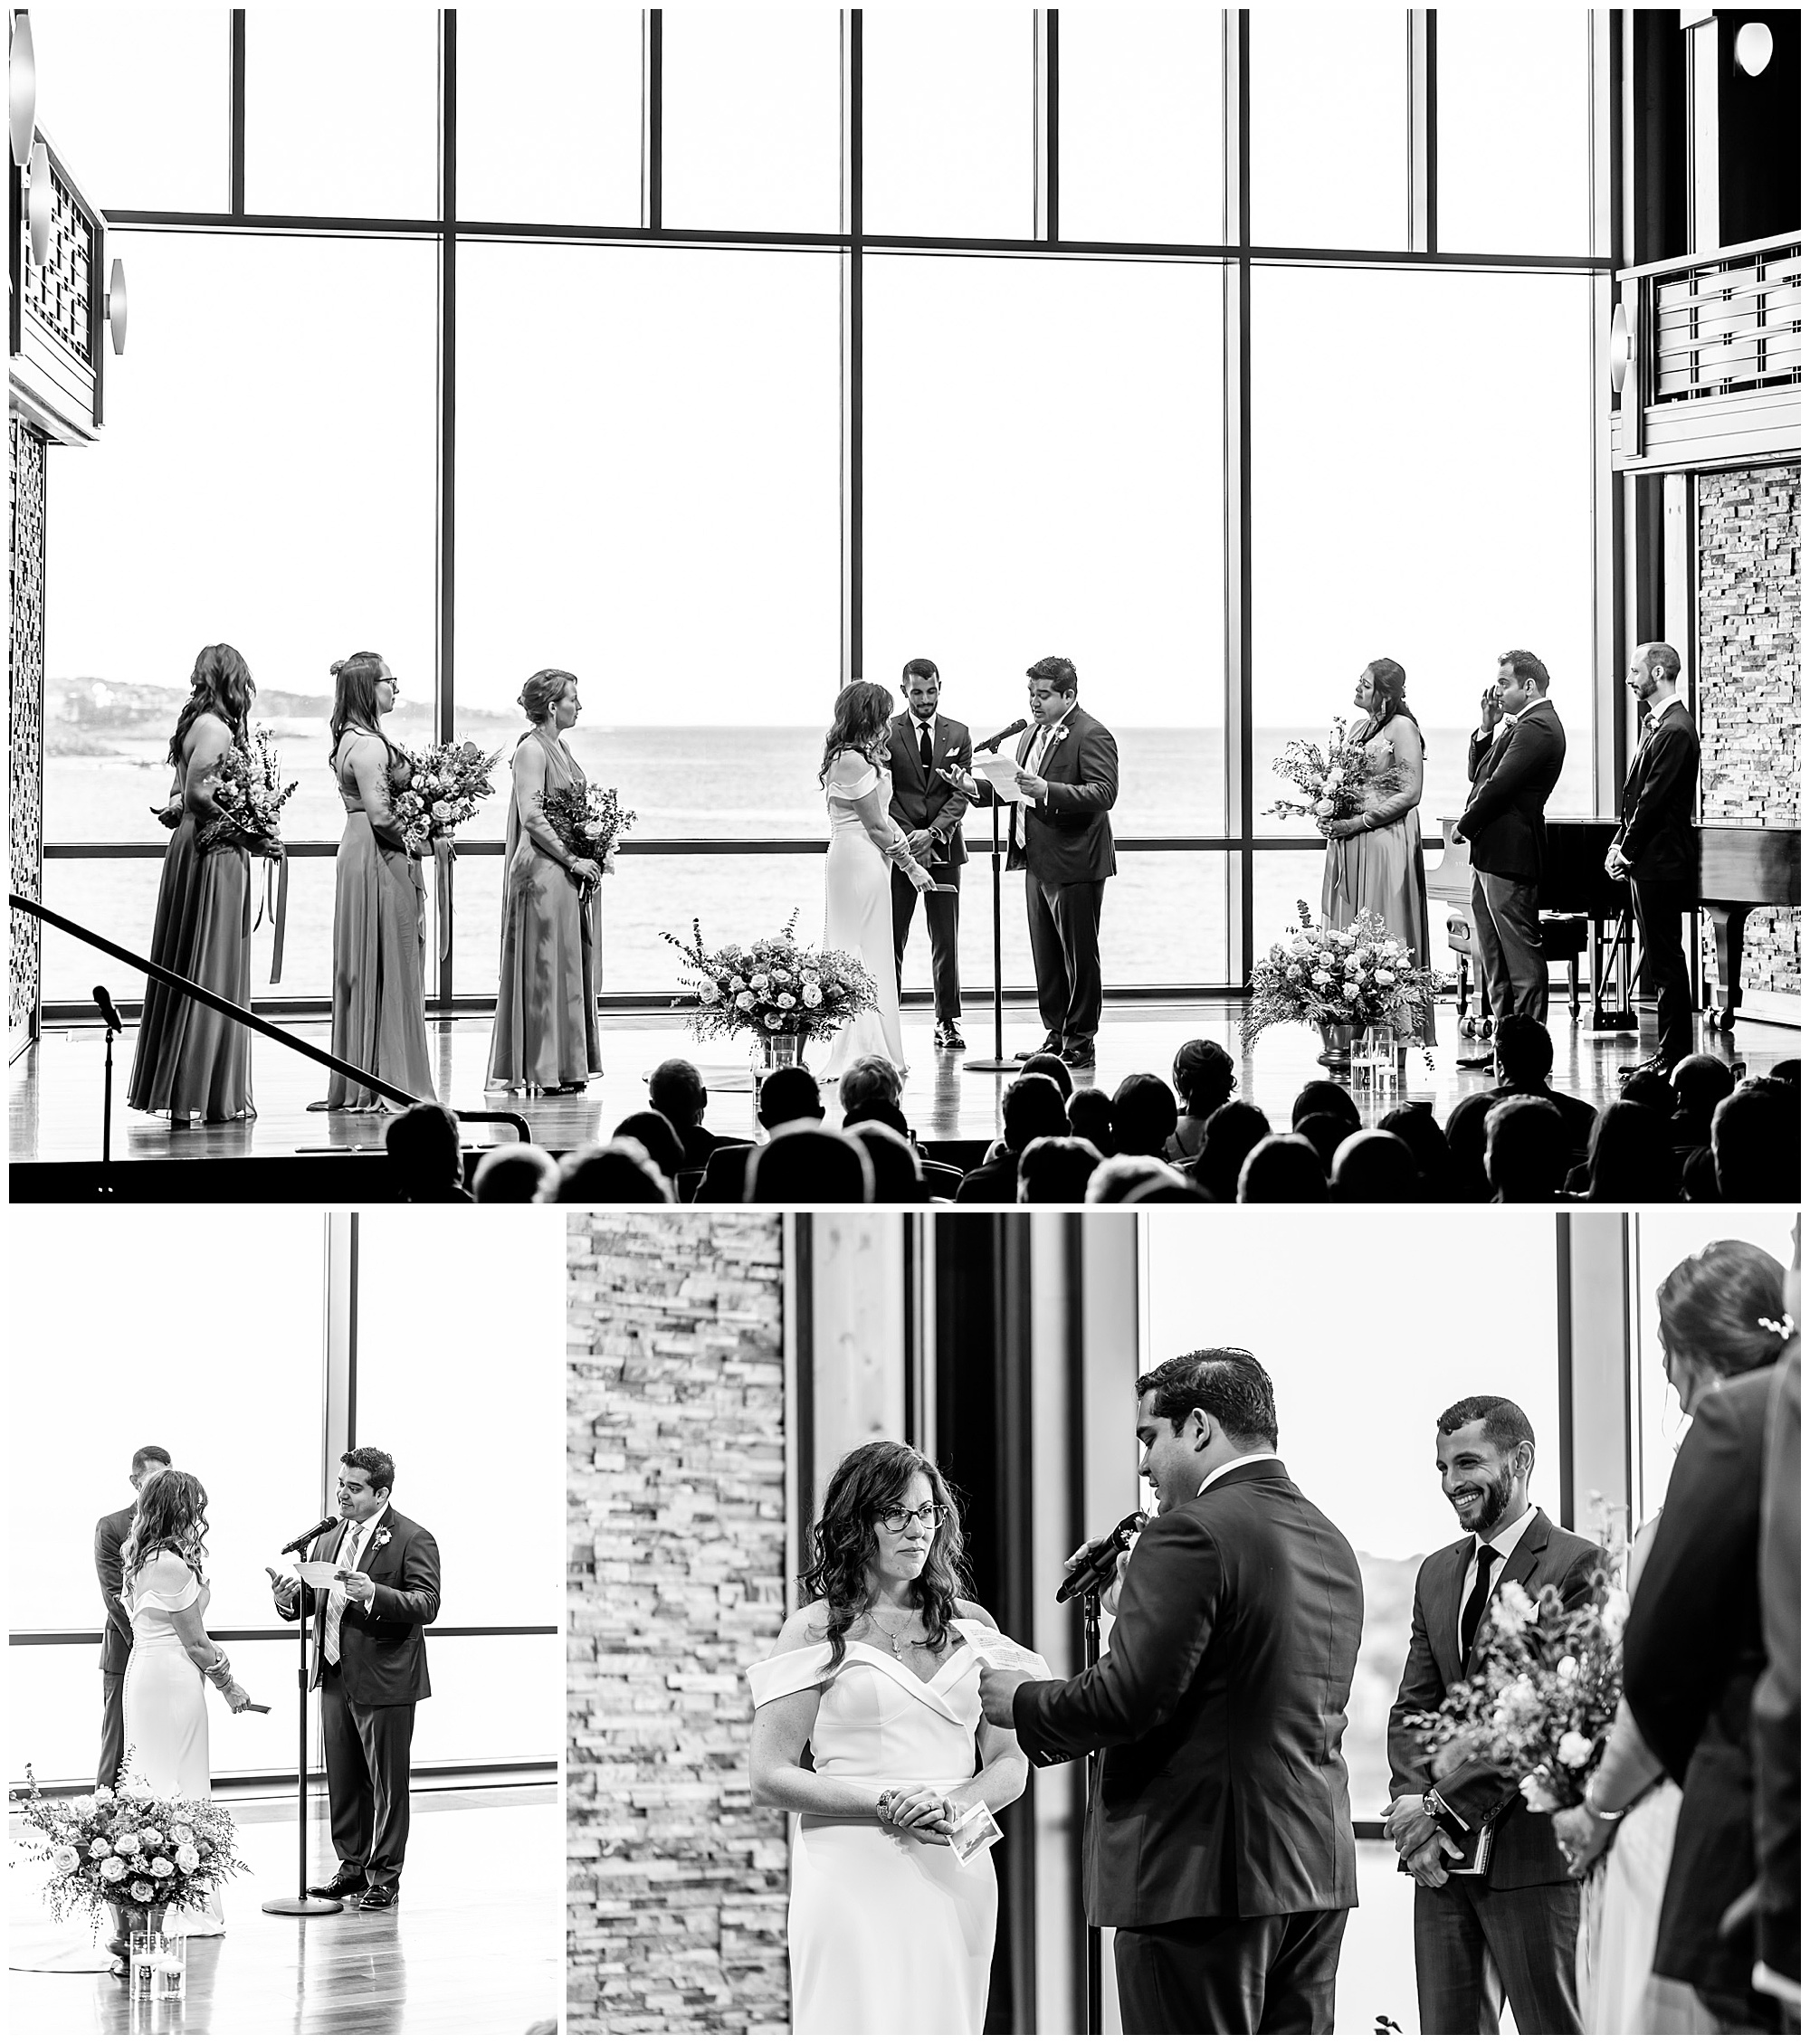 Shalin Liu Rockport wedding, waterfront wedding, Rockport MA wedding, Shalin Liu wedding, MA coastline wedding, MA seaport wedding, Rockport wedding photography, Rockport MA wedding, seaside wedding, DC wedding photographer, Rachel E.H. Photography, autumn wedding, Nicole Malone, black and white, groom reading vows, alter in front of huge window, Officiant Zuhair Nasher from Words That Last